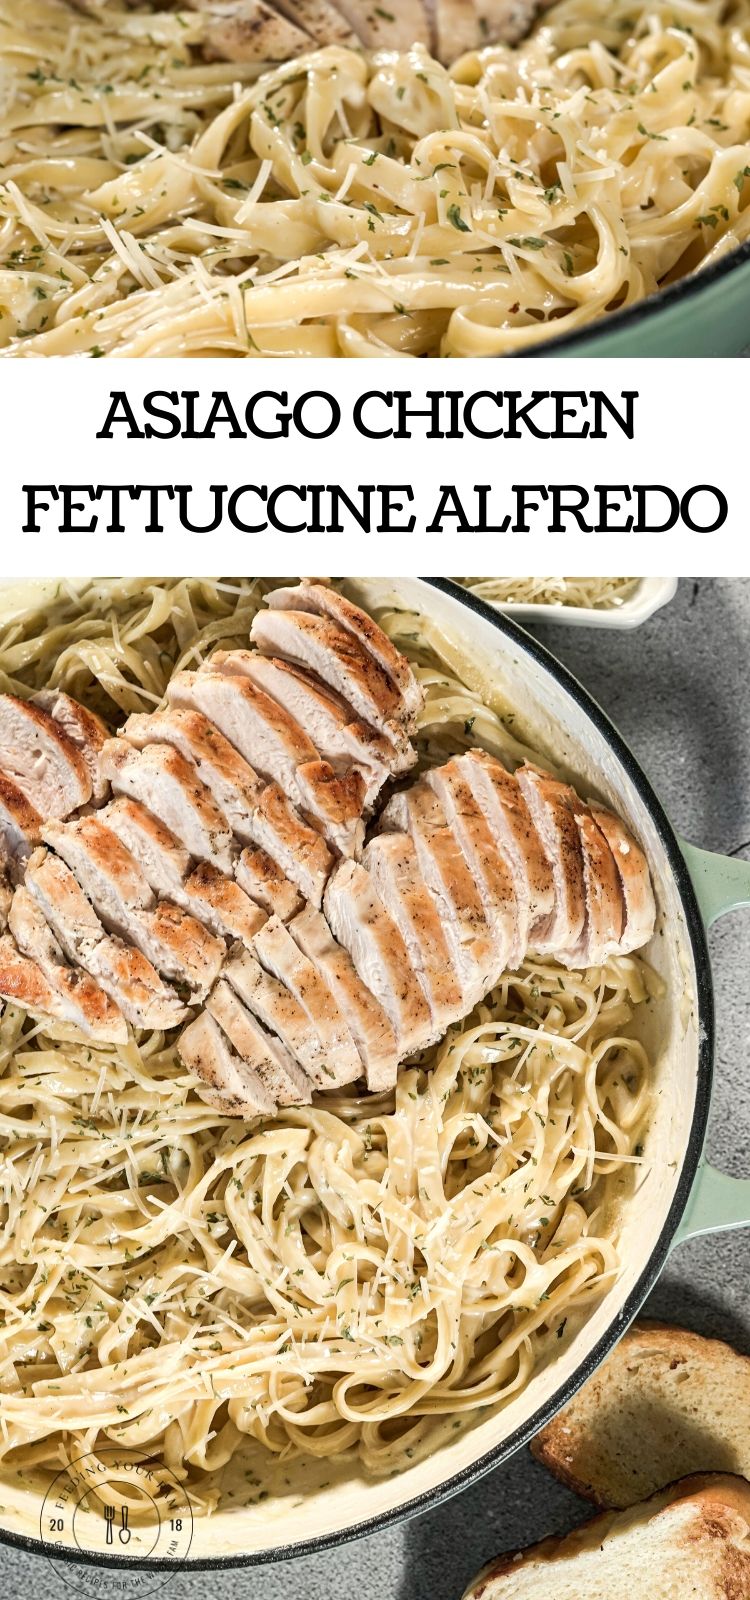 image of asiago alfredo with sliced chicken